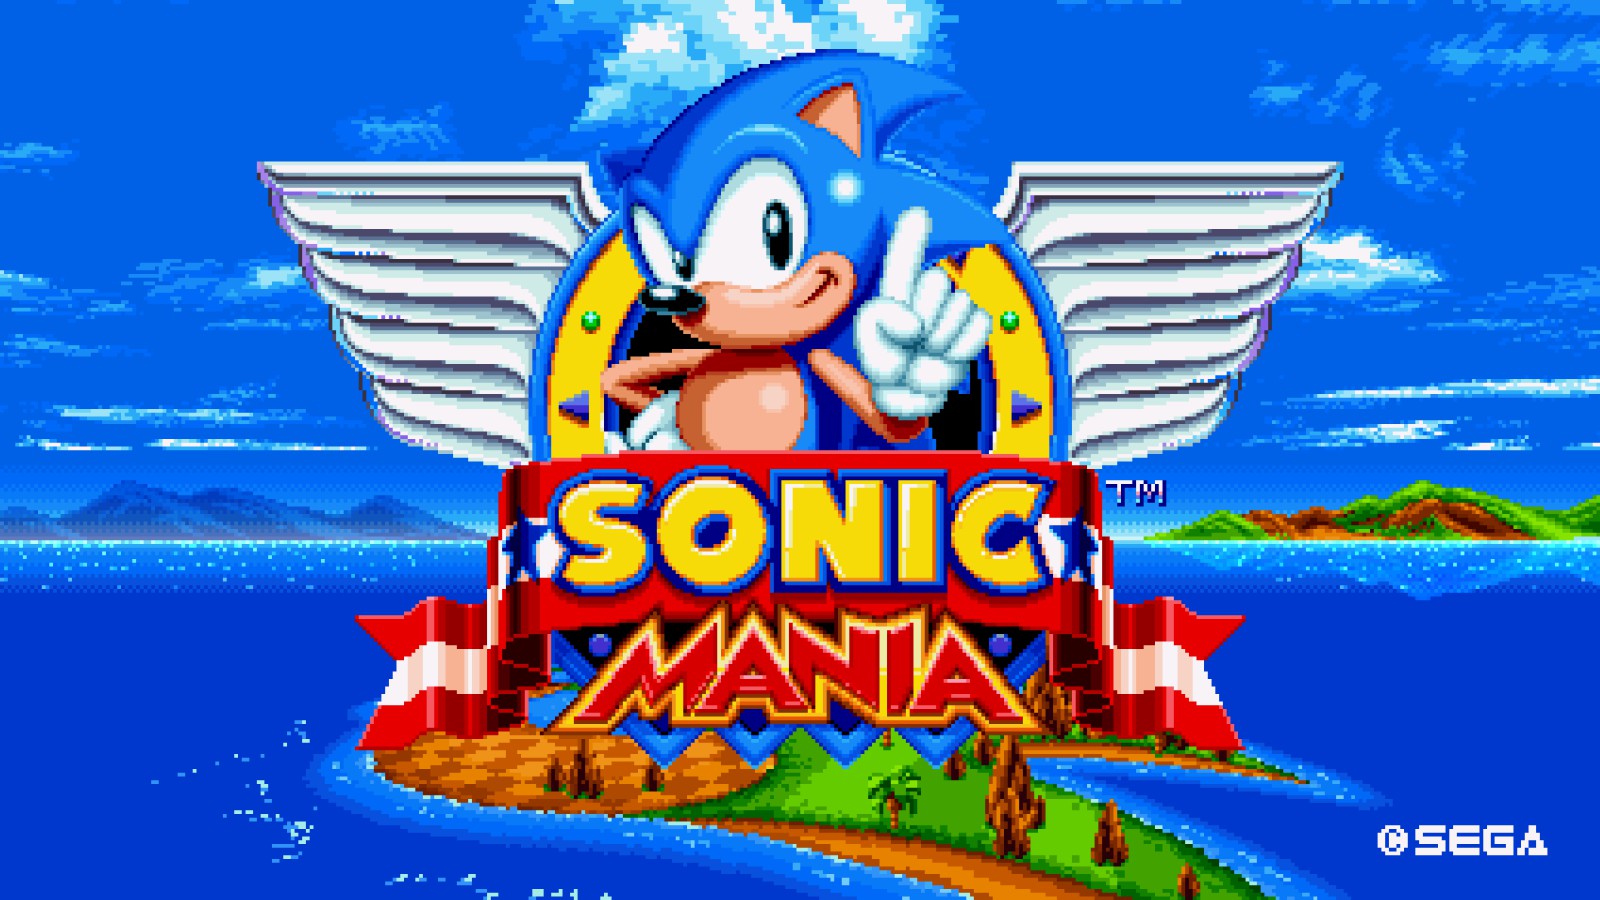 Sonic Mania Could Be Getting New Dlc Titled Project - Sonic Mania - HD Wallpaper 